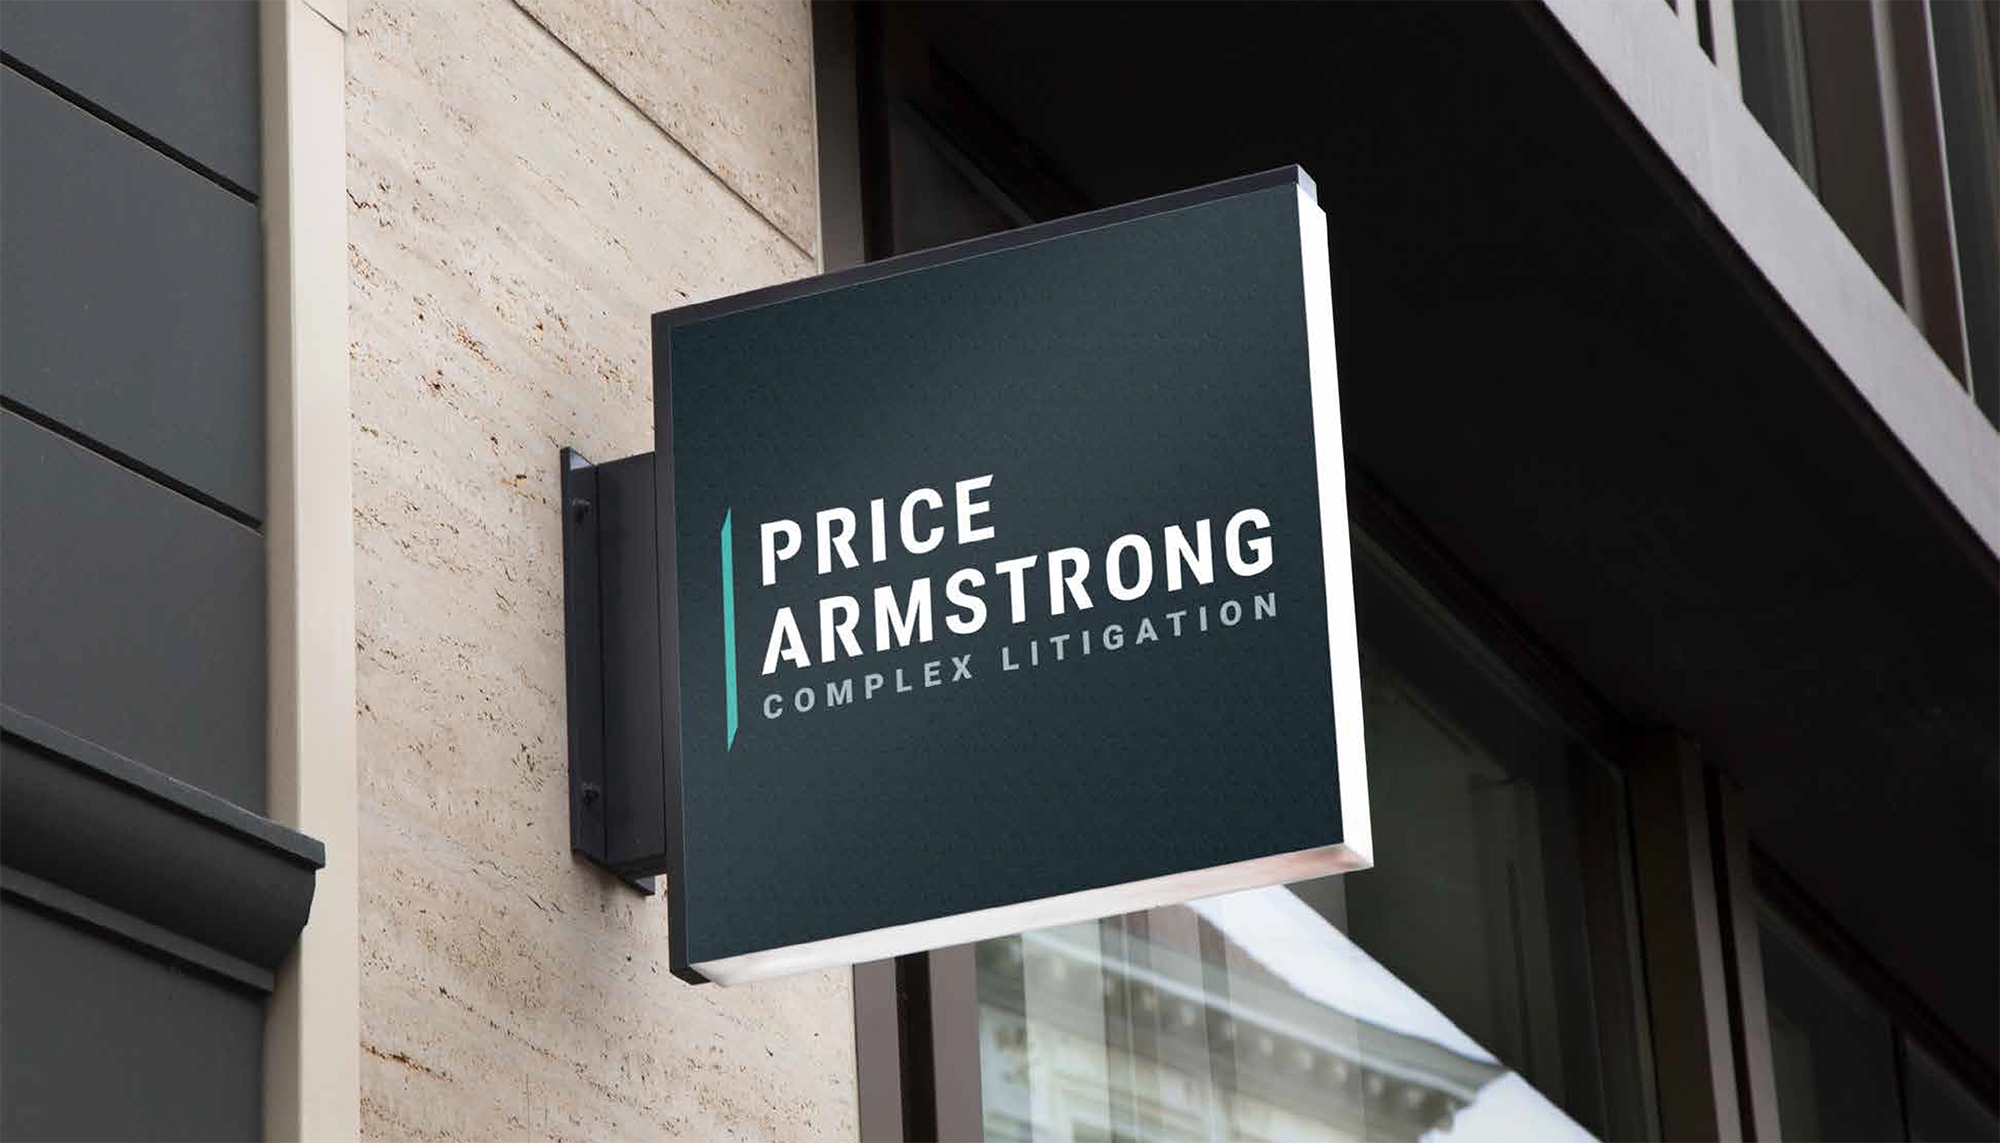 Price Armstrong